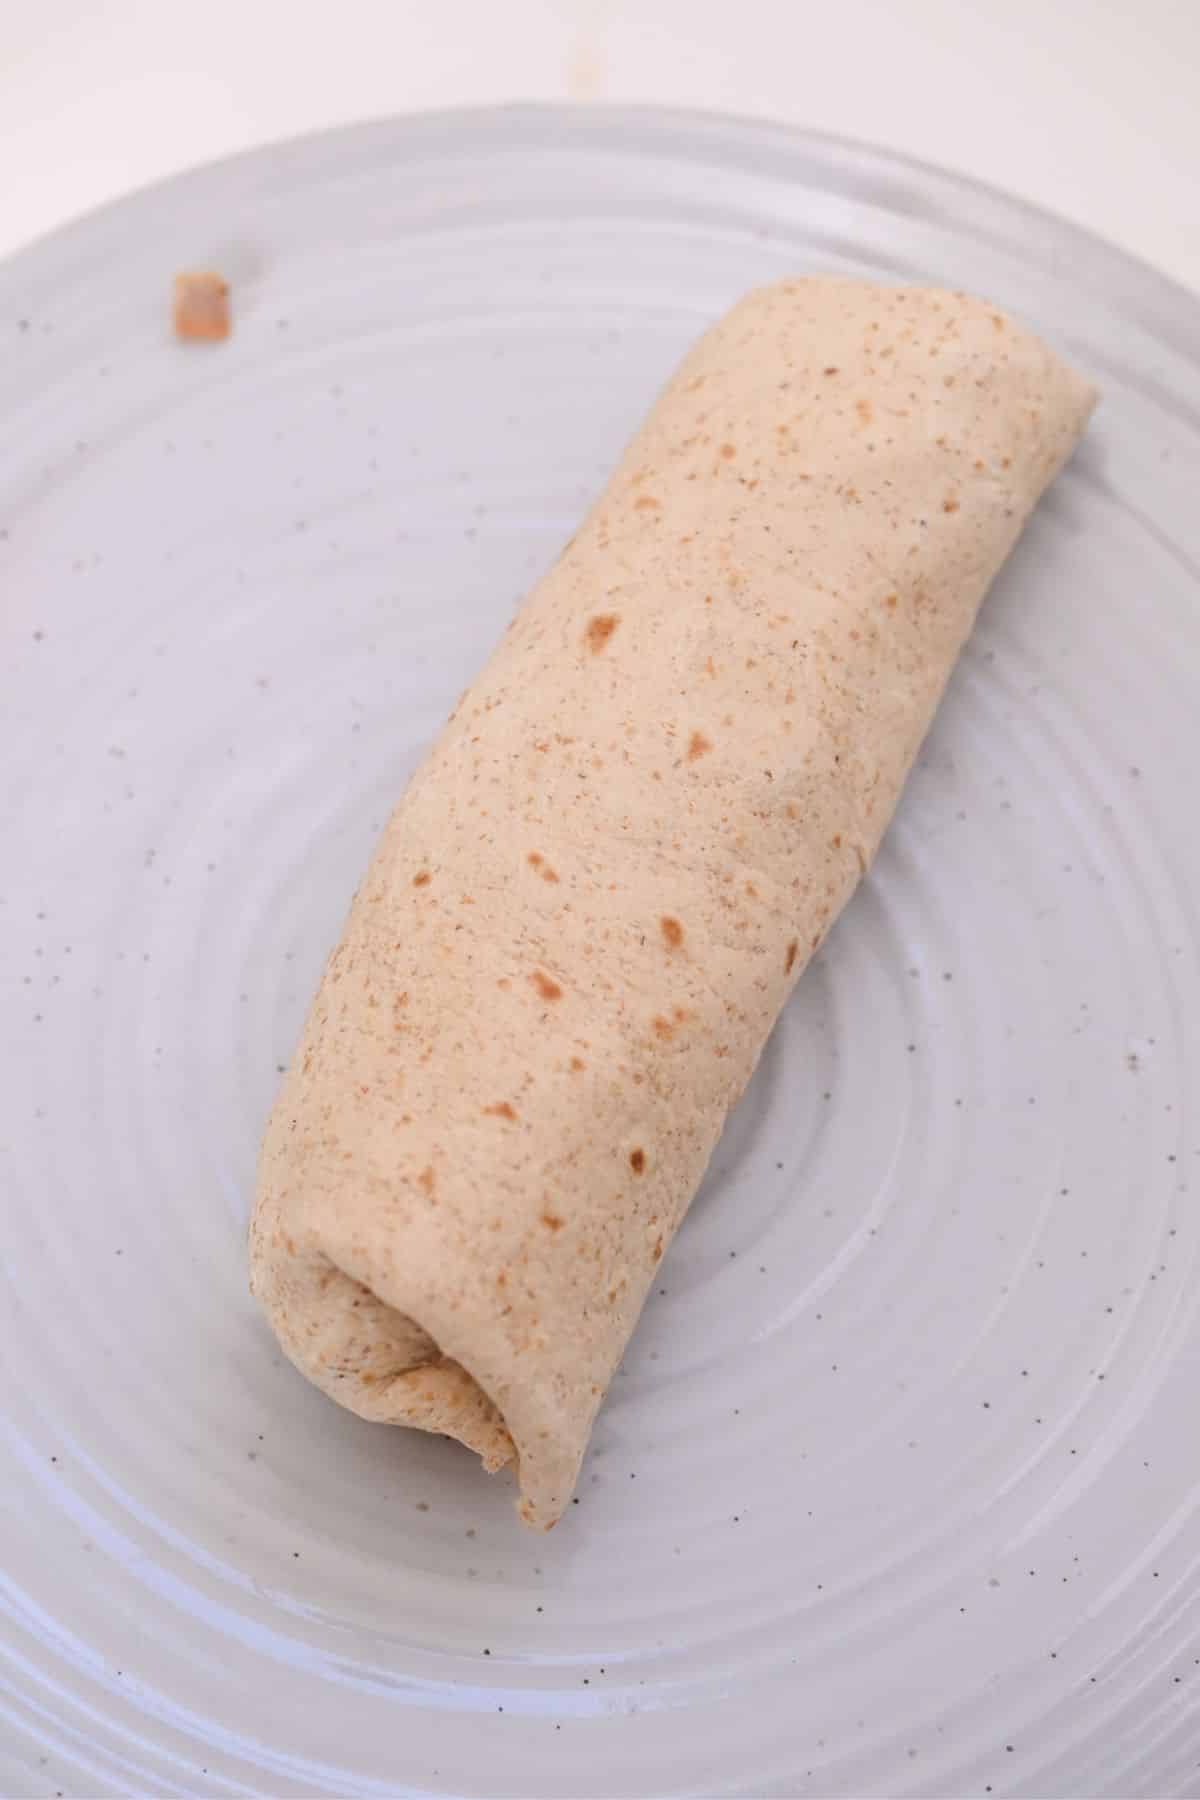 Rolled up Breakfast Burrito